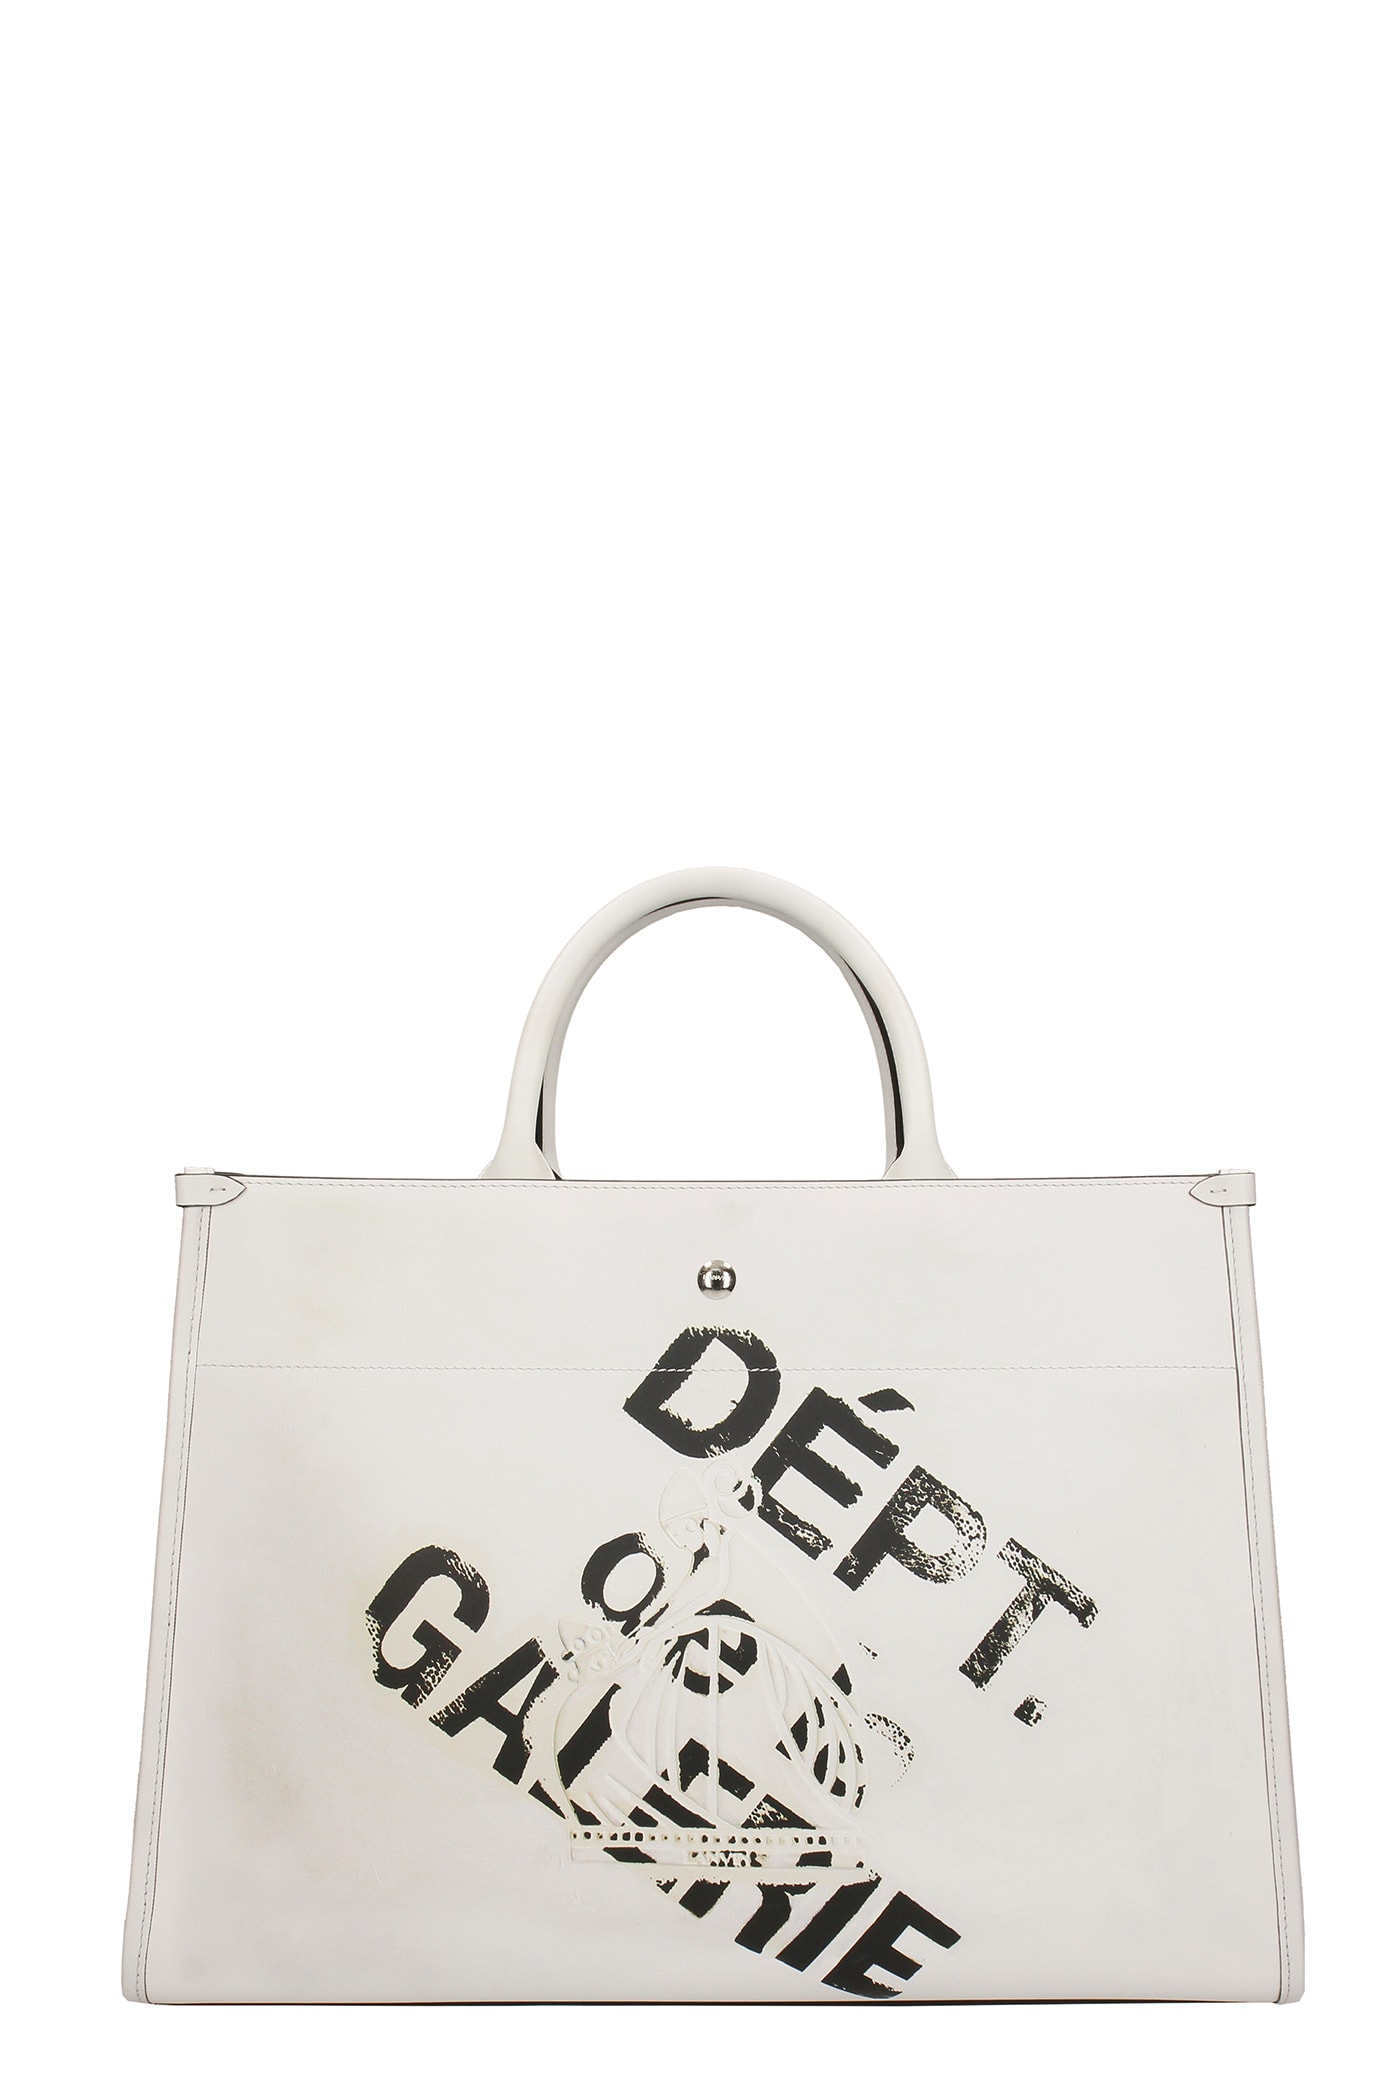 Gallery Dept. Tote In White Leather